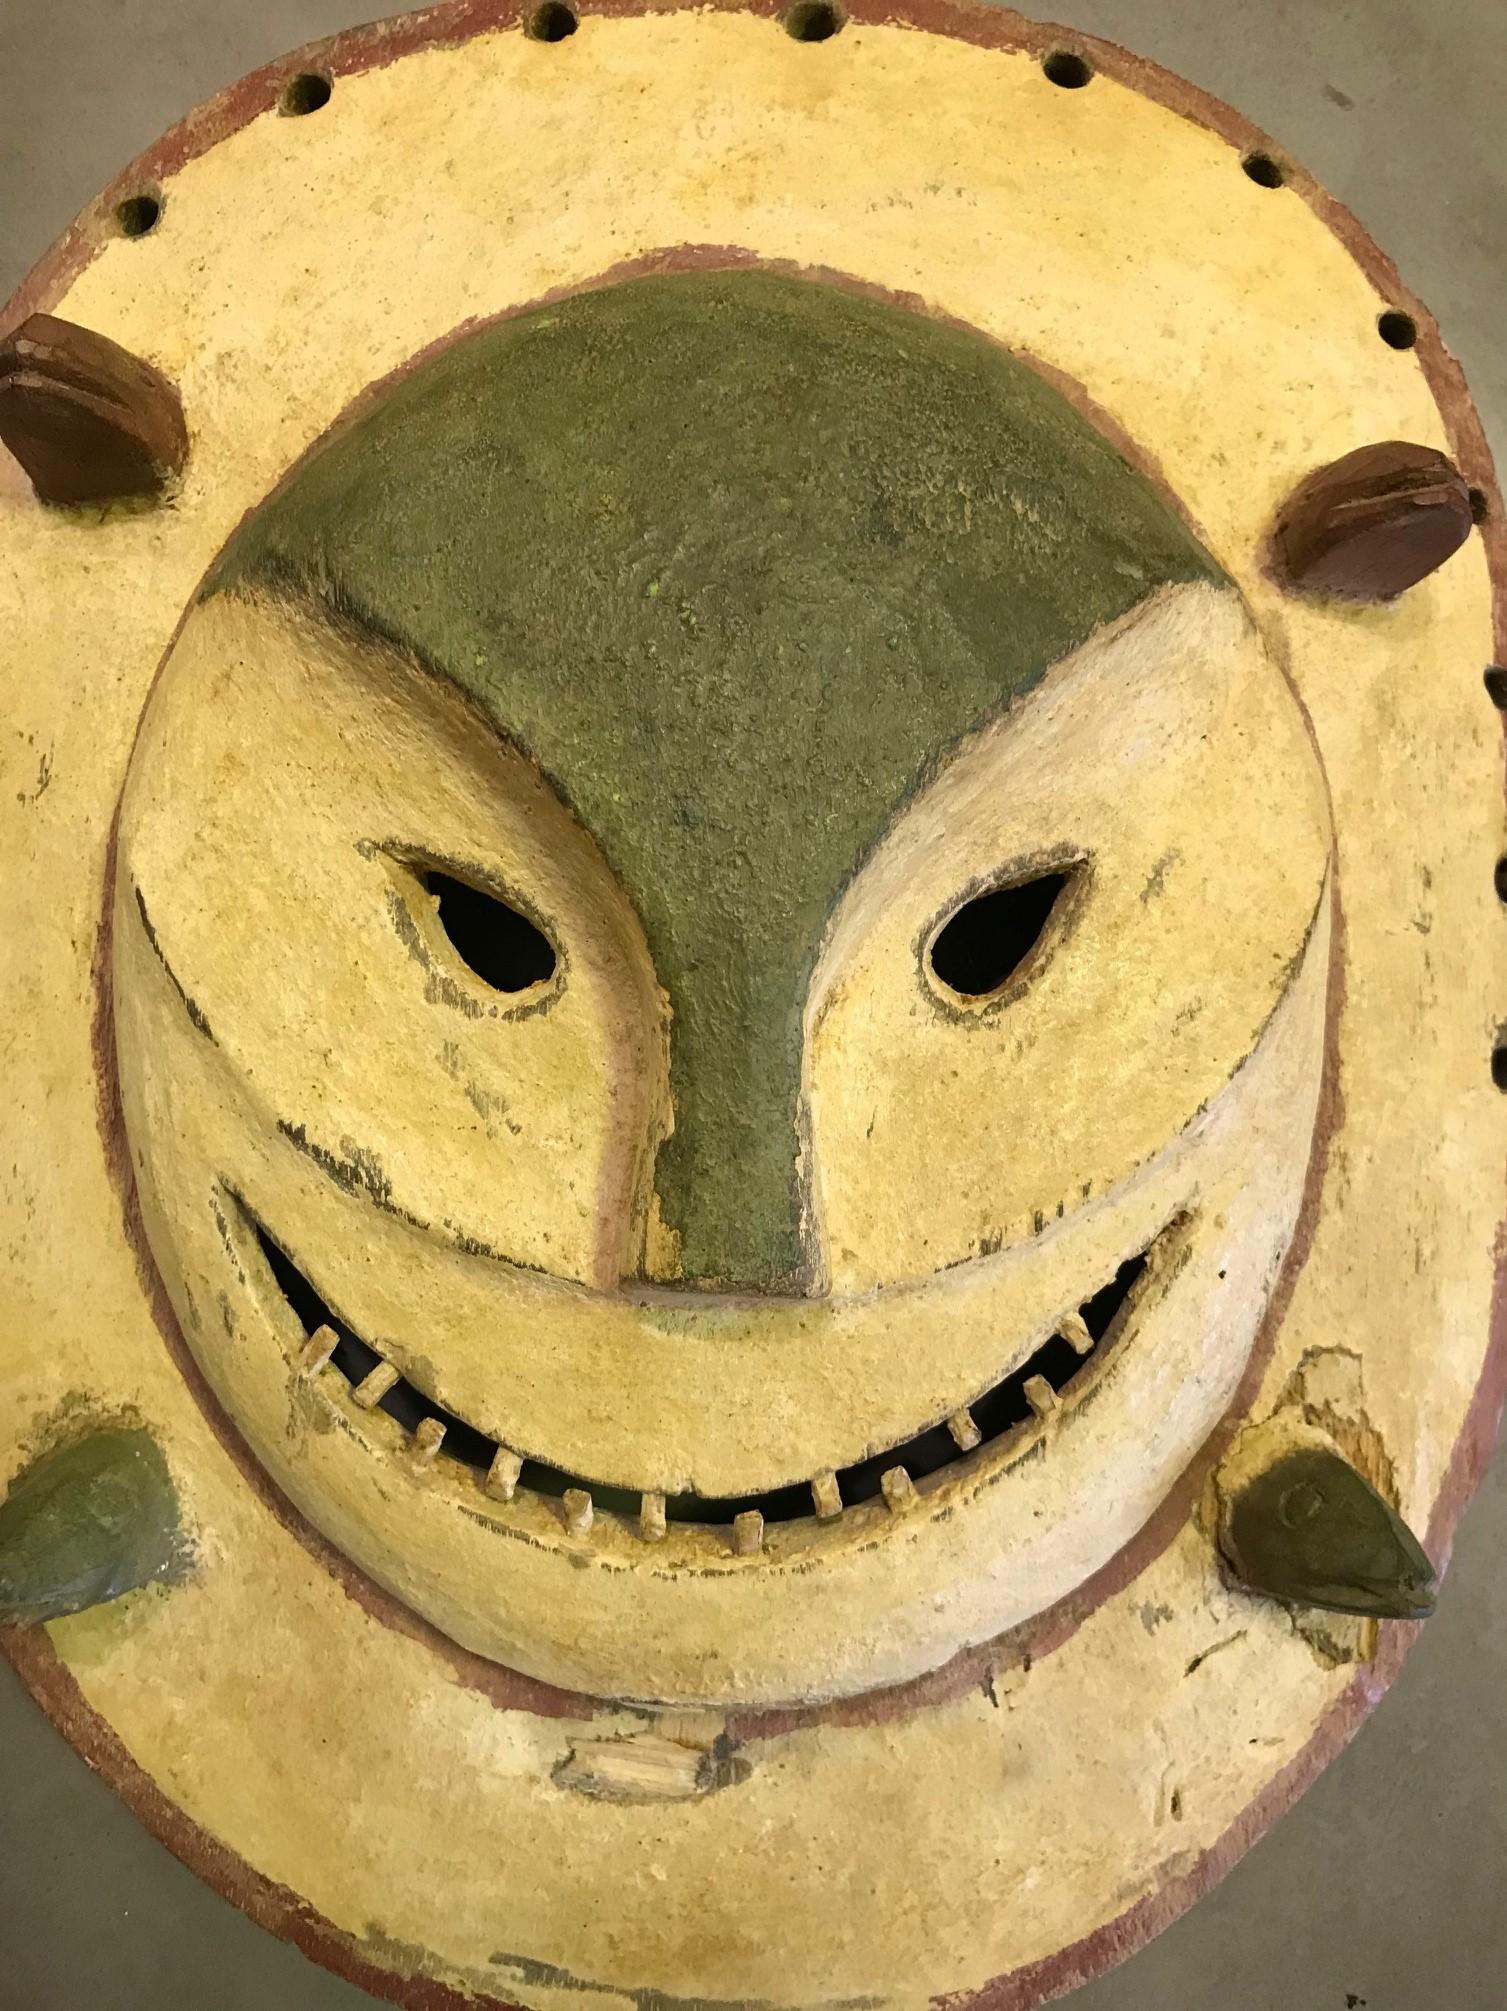 A fantastic, somewhat sinister appearing mask by the Yup'ik (Yupik) aboriginal, indigenous people of South-Western & South Central Alaska. The Yup'ik people, who are related to the Inuit peoples, have a long history of ceremonial mask making. Yup'ik